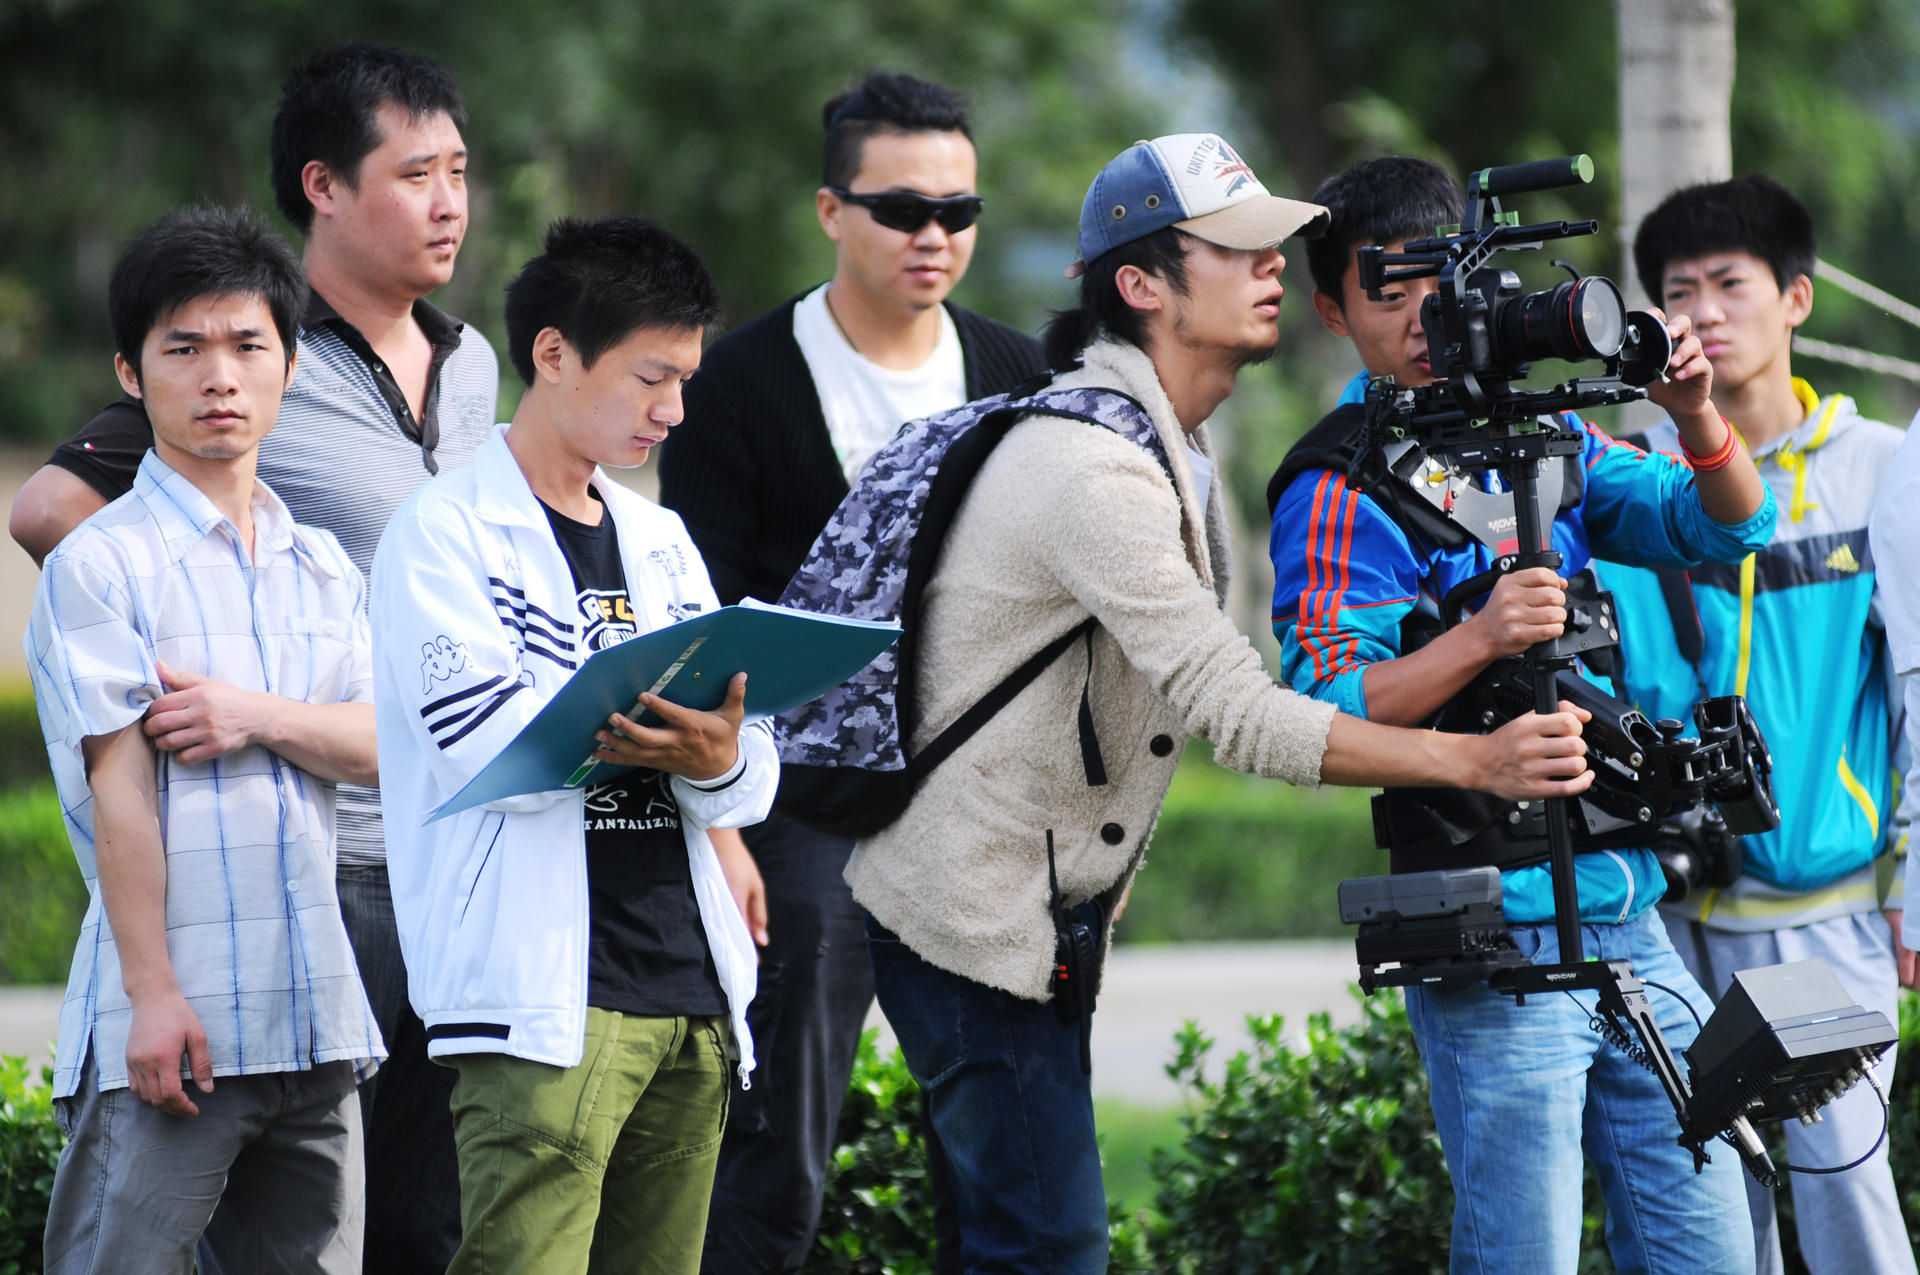 Online film director Mai Tian (third from right) directing his microfilm Glorious Days in 2012.